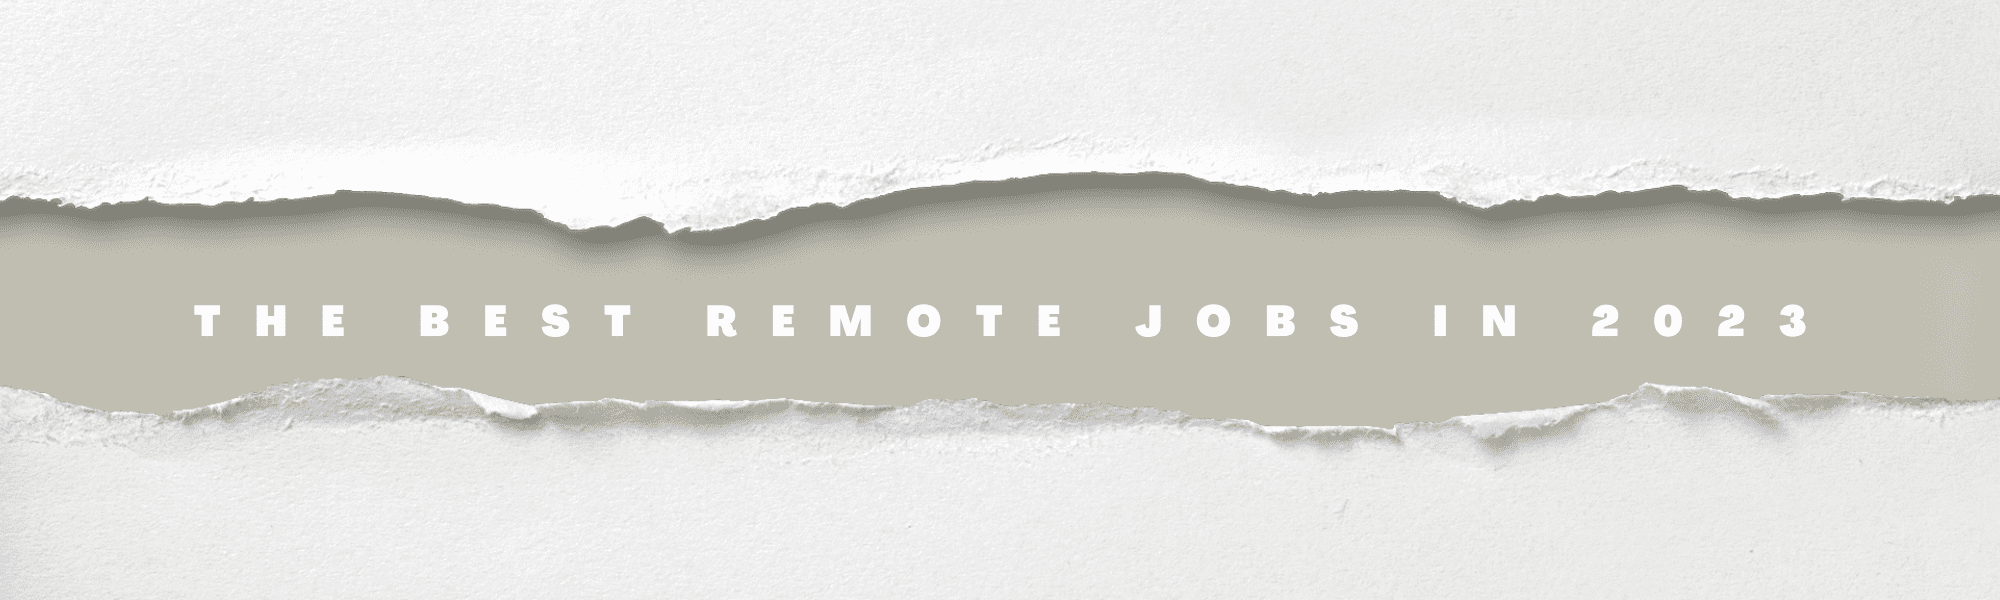 The best remote jobs you can get right away